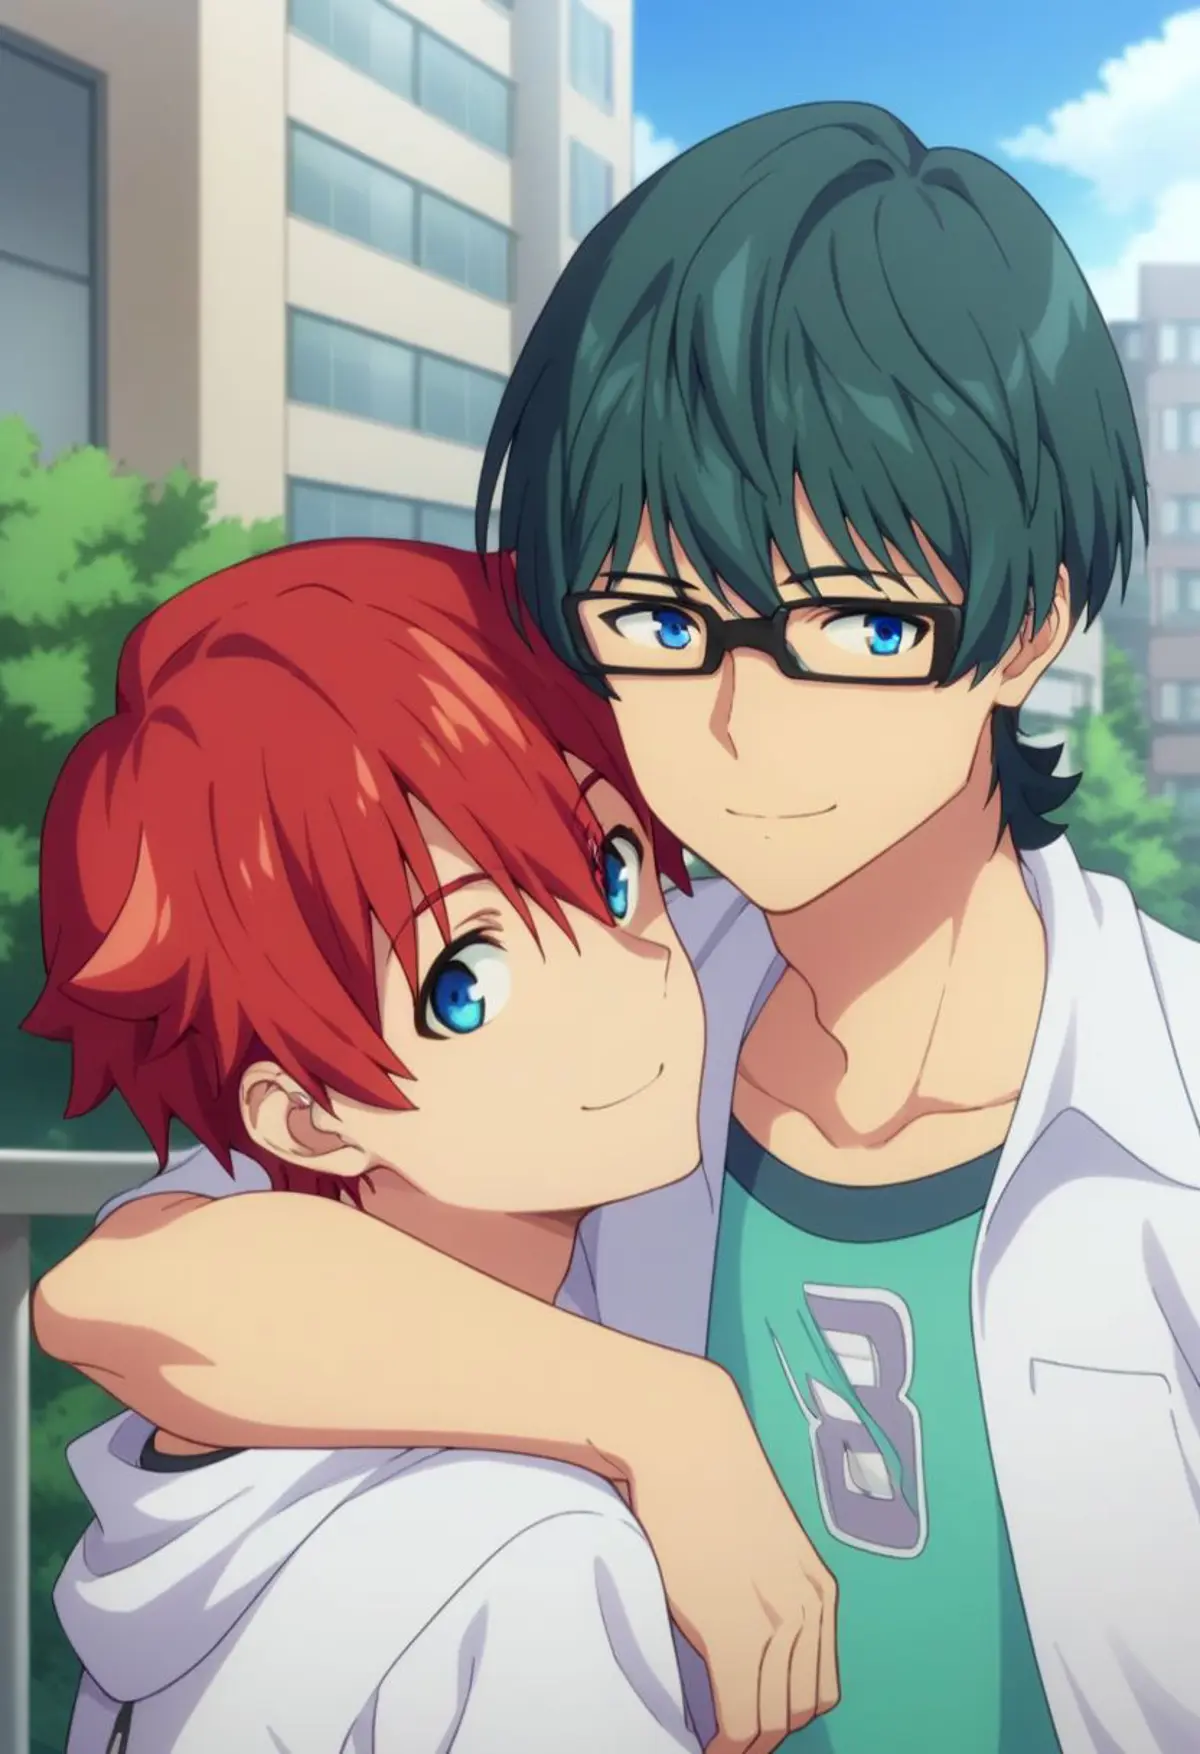 Two young men posing for a picture in a cityscape. The character in the foreground has bright red hair and is smiling, the other character who has green hair and glasses, and is also smiling has his arm wrapped around the character, leaning on his shoulder. They are both dressed casually; the red-haired character wears a white hoodie, while the green-haired character wears a white shirt over a teal t-shirt.